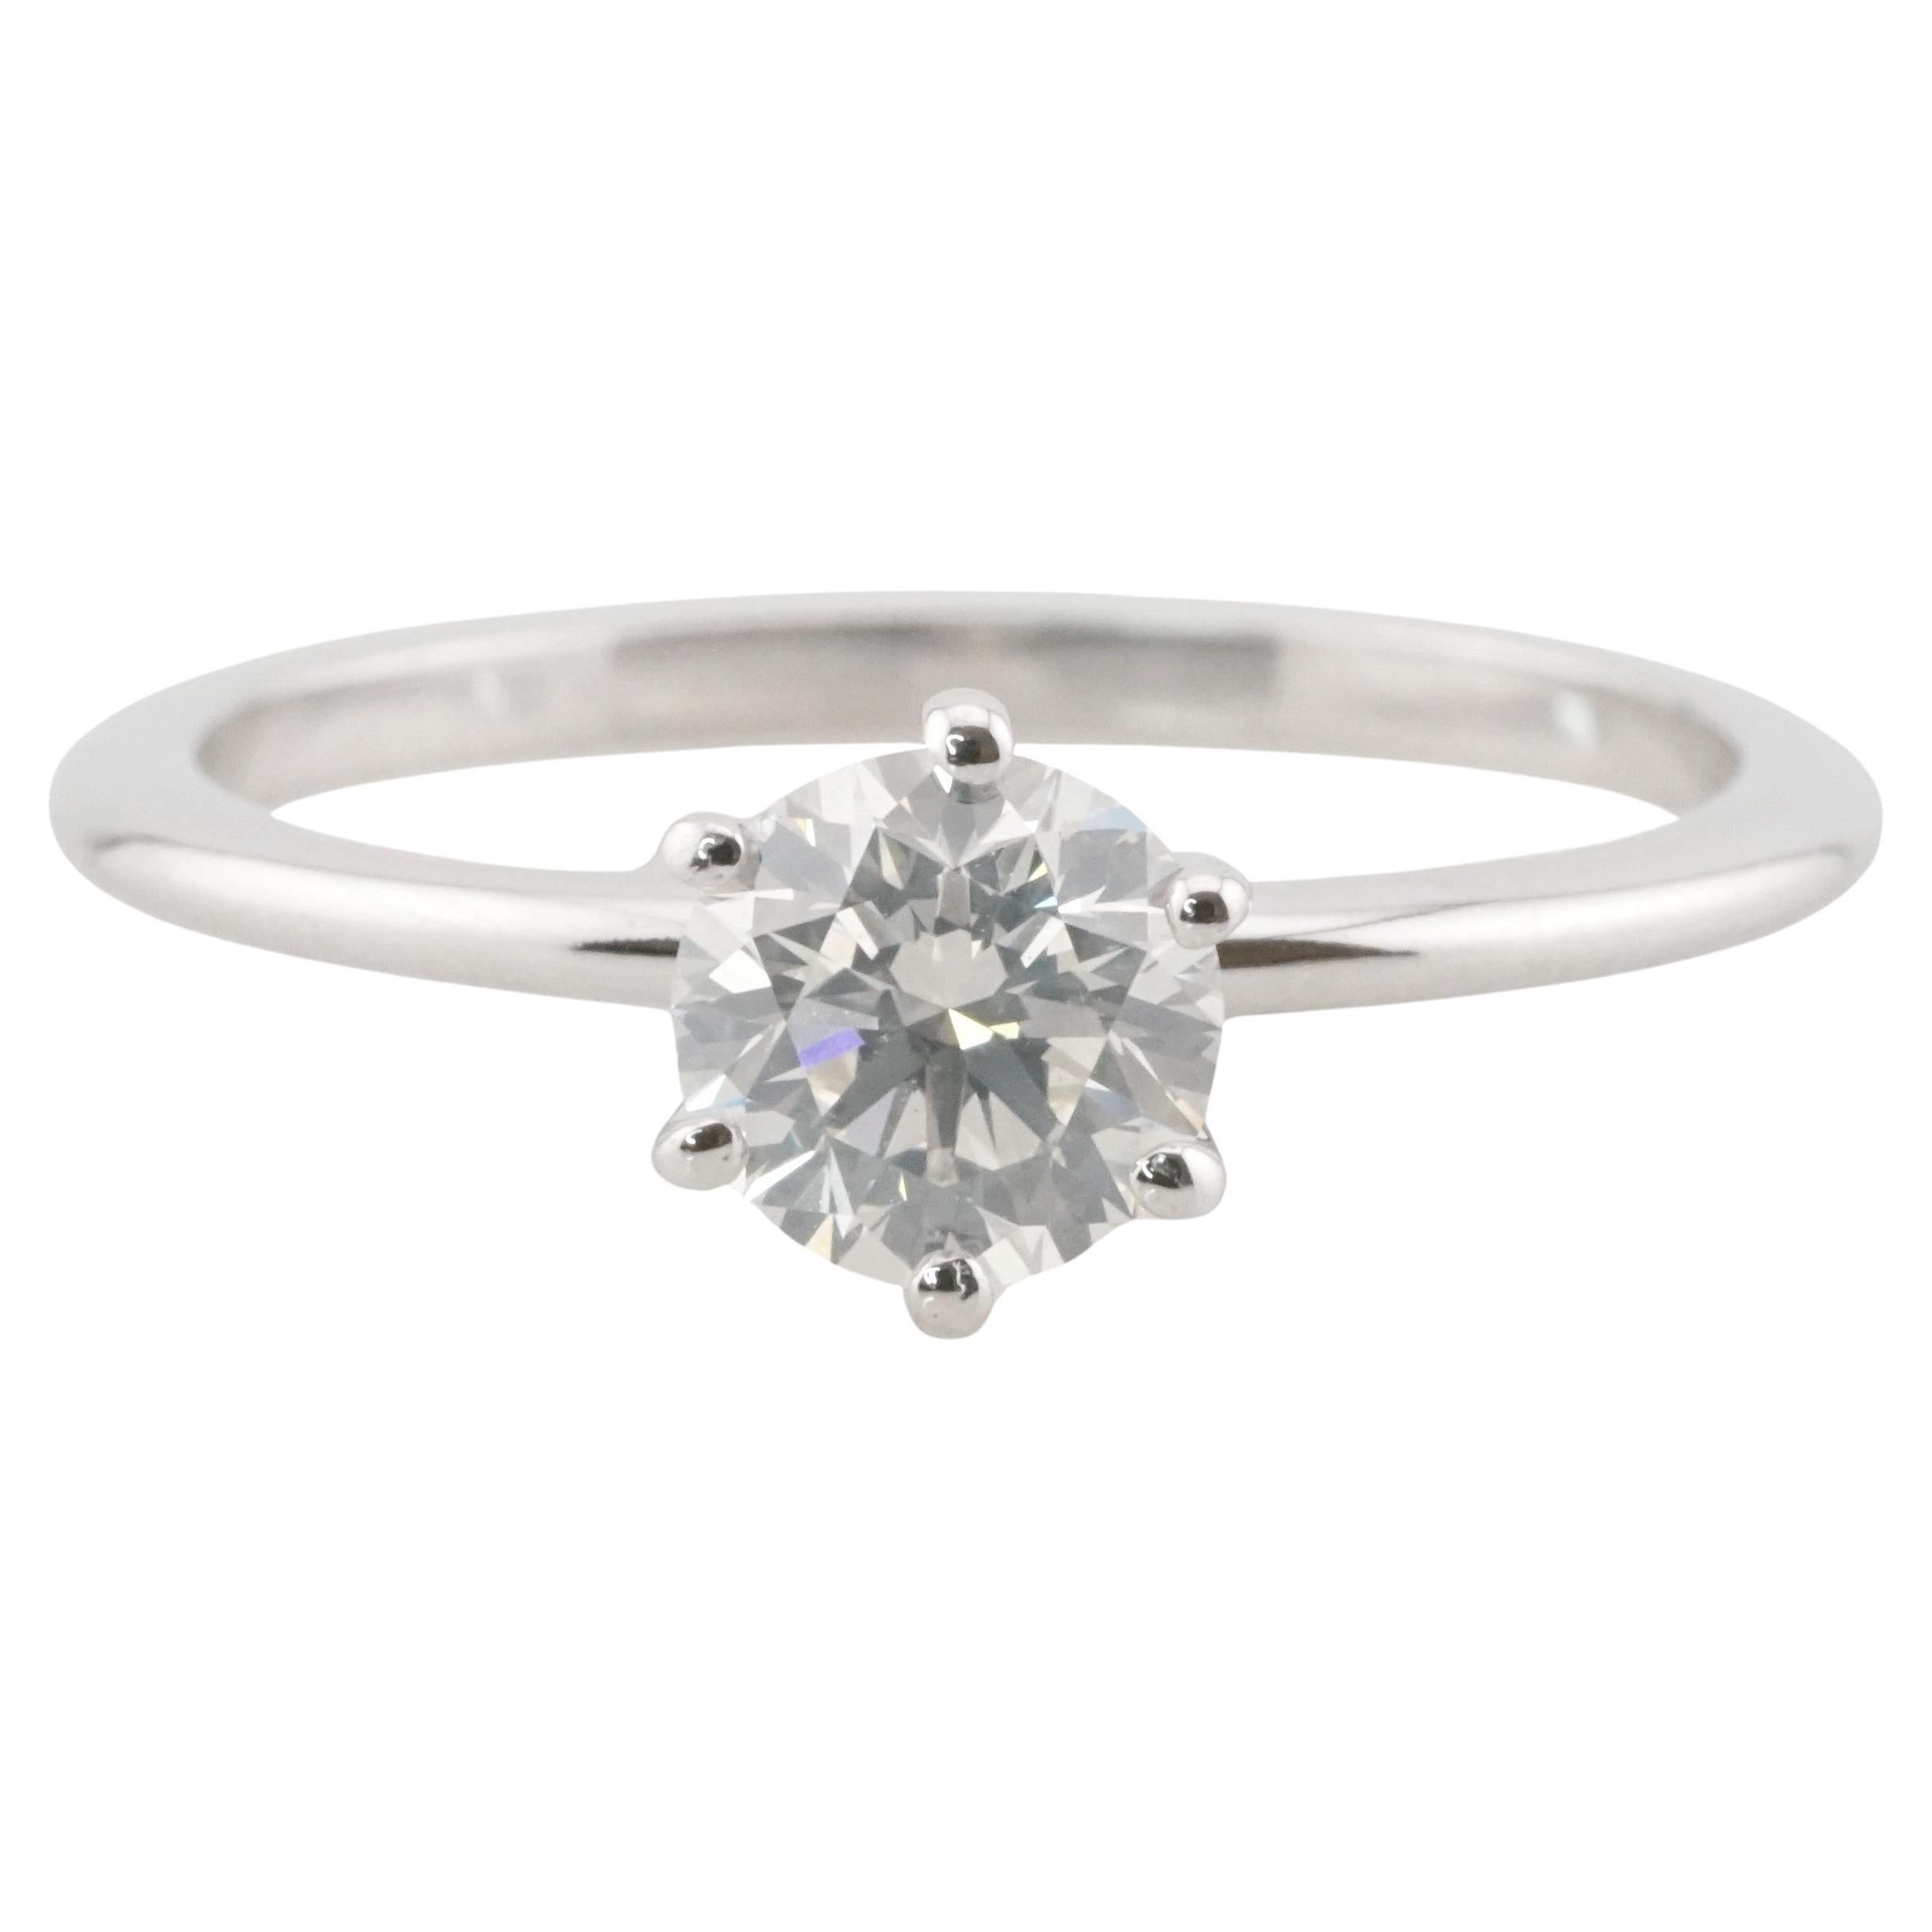 GIA Certified 0.78 Carat Round Cut Diamond 18K White Gold Solitaire Ring